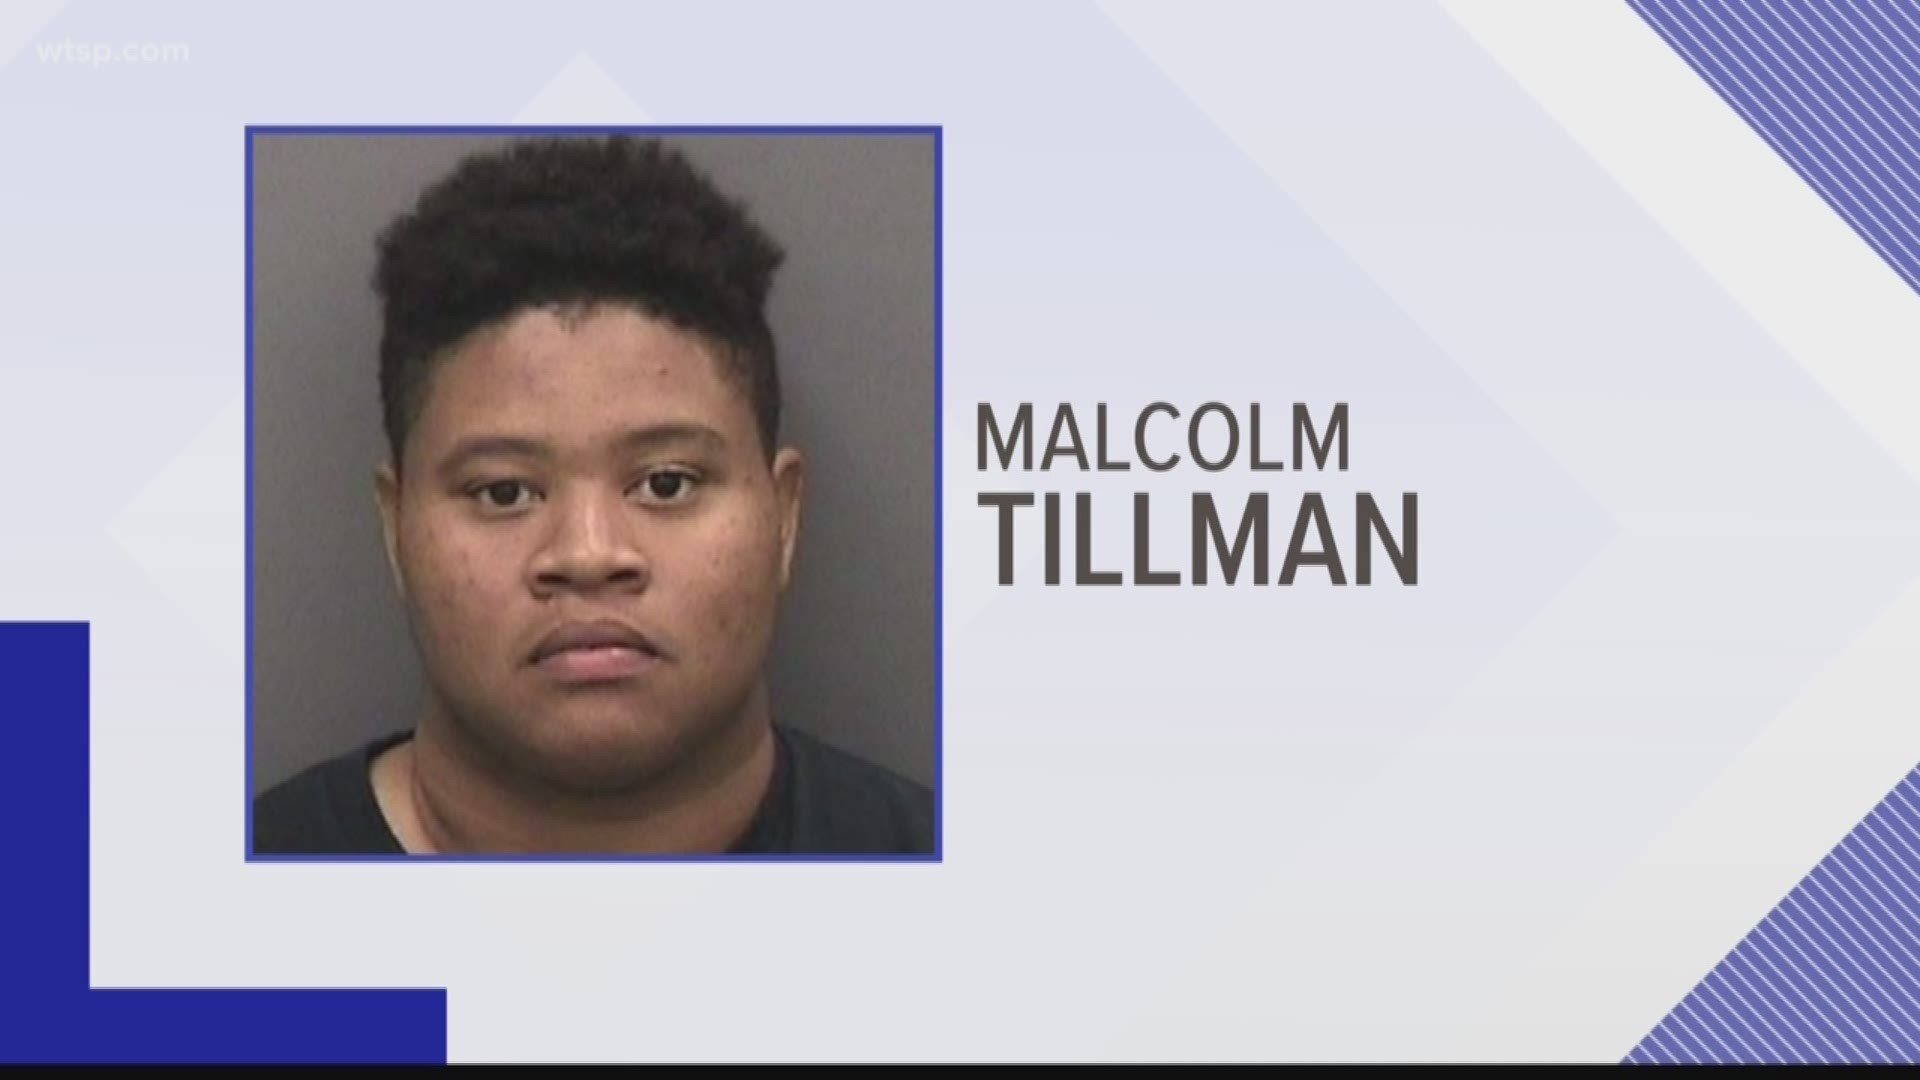 Malcolm Tillman had been working at the elementary school since October and passed all background checks prior to employment